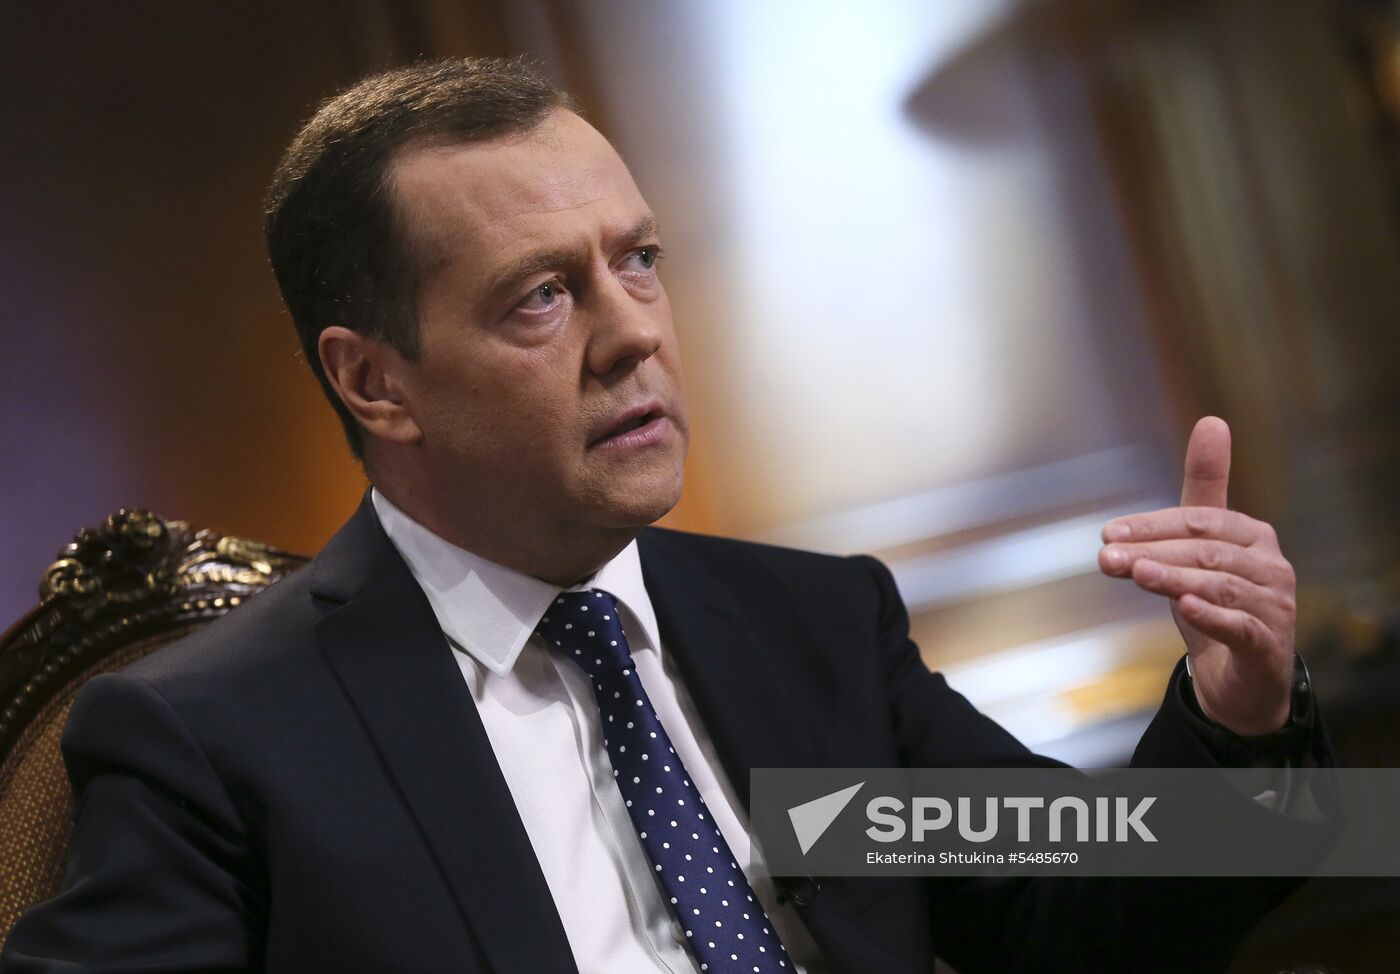 Prime Minister Dmitry Medvedev gives interview to 'Saturday News' anchor Sergei Brilev